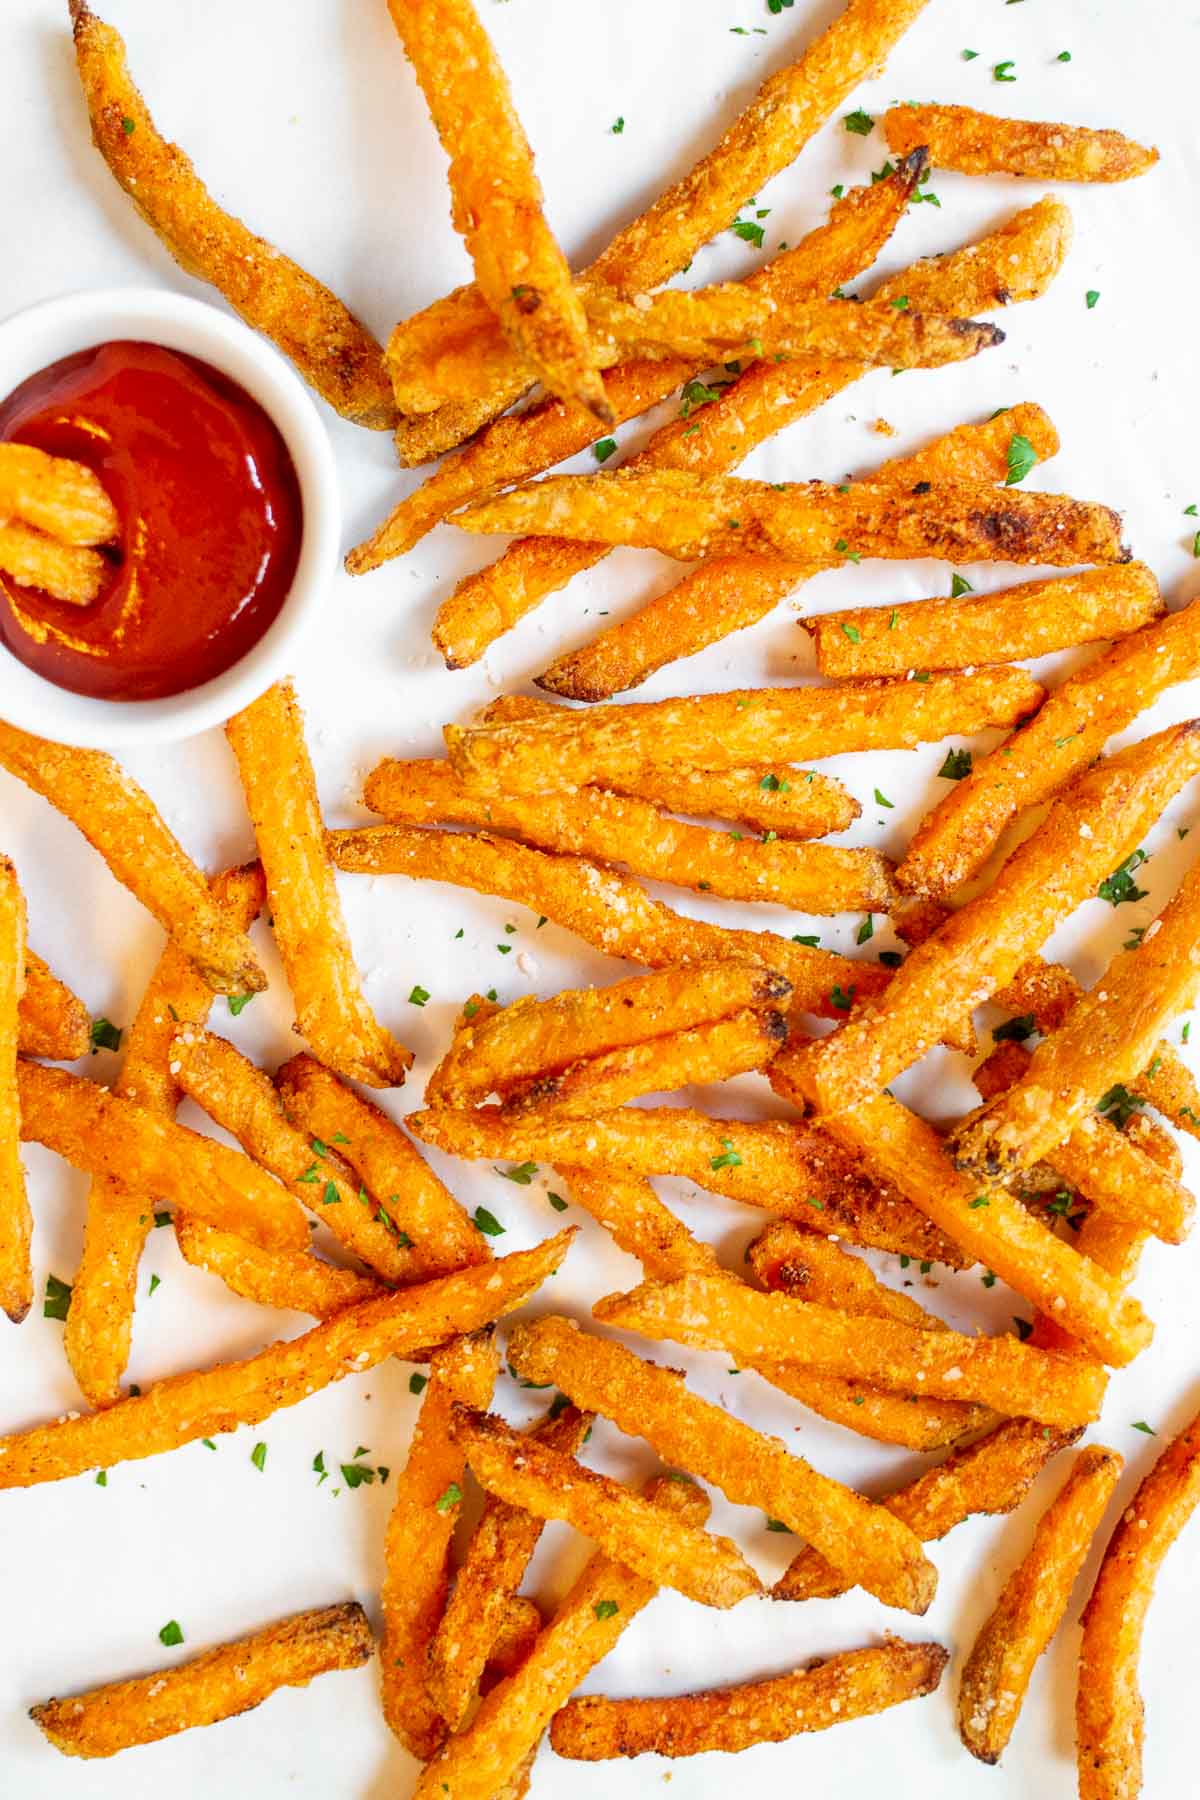 Sweet potato fries with a small bowl of ketchup